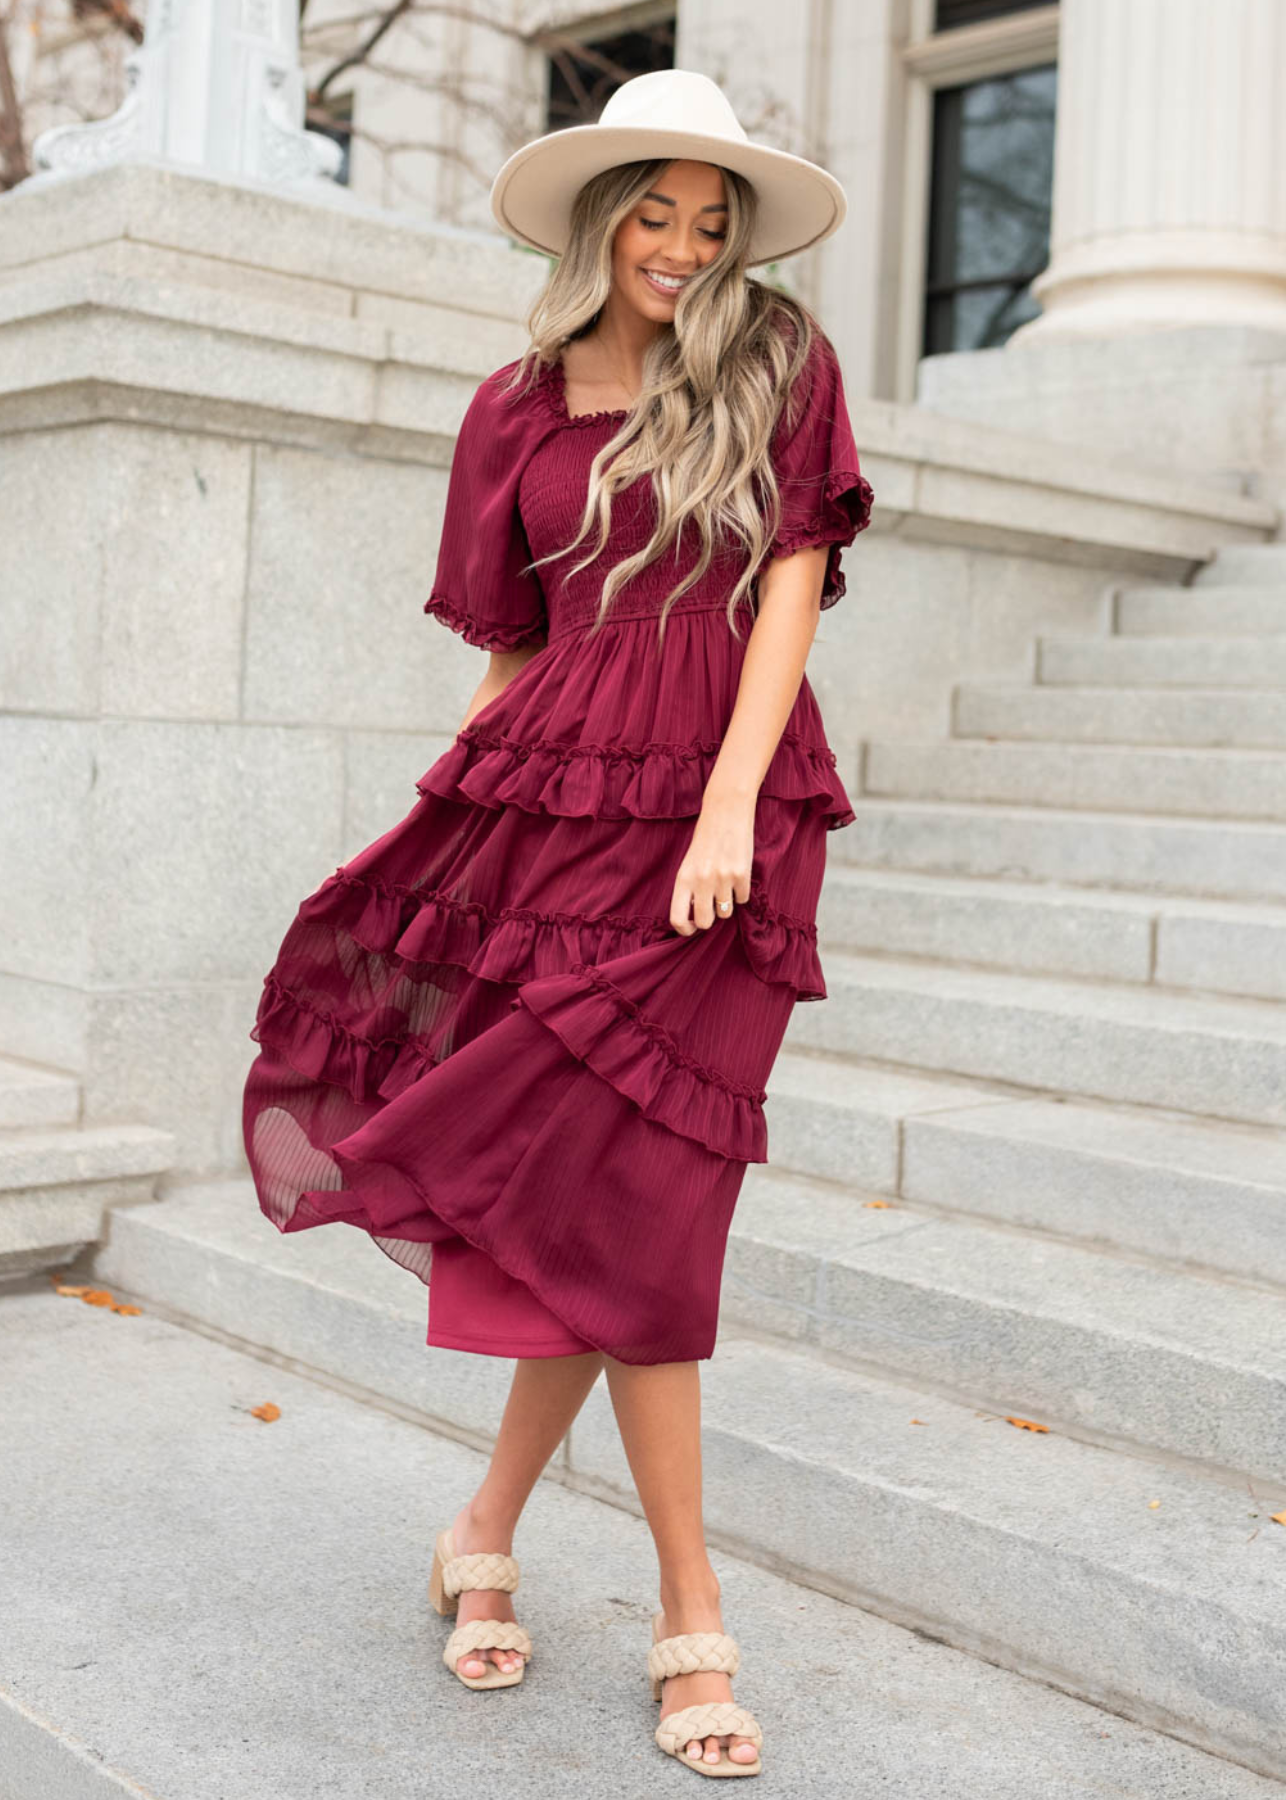 Burgundy tiered dress with ruffles on skirt and short sleeves